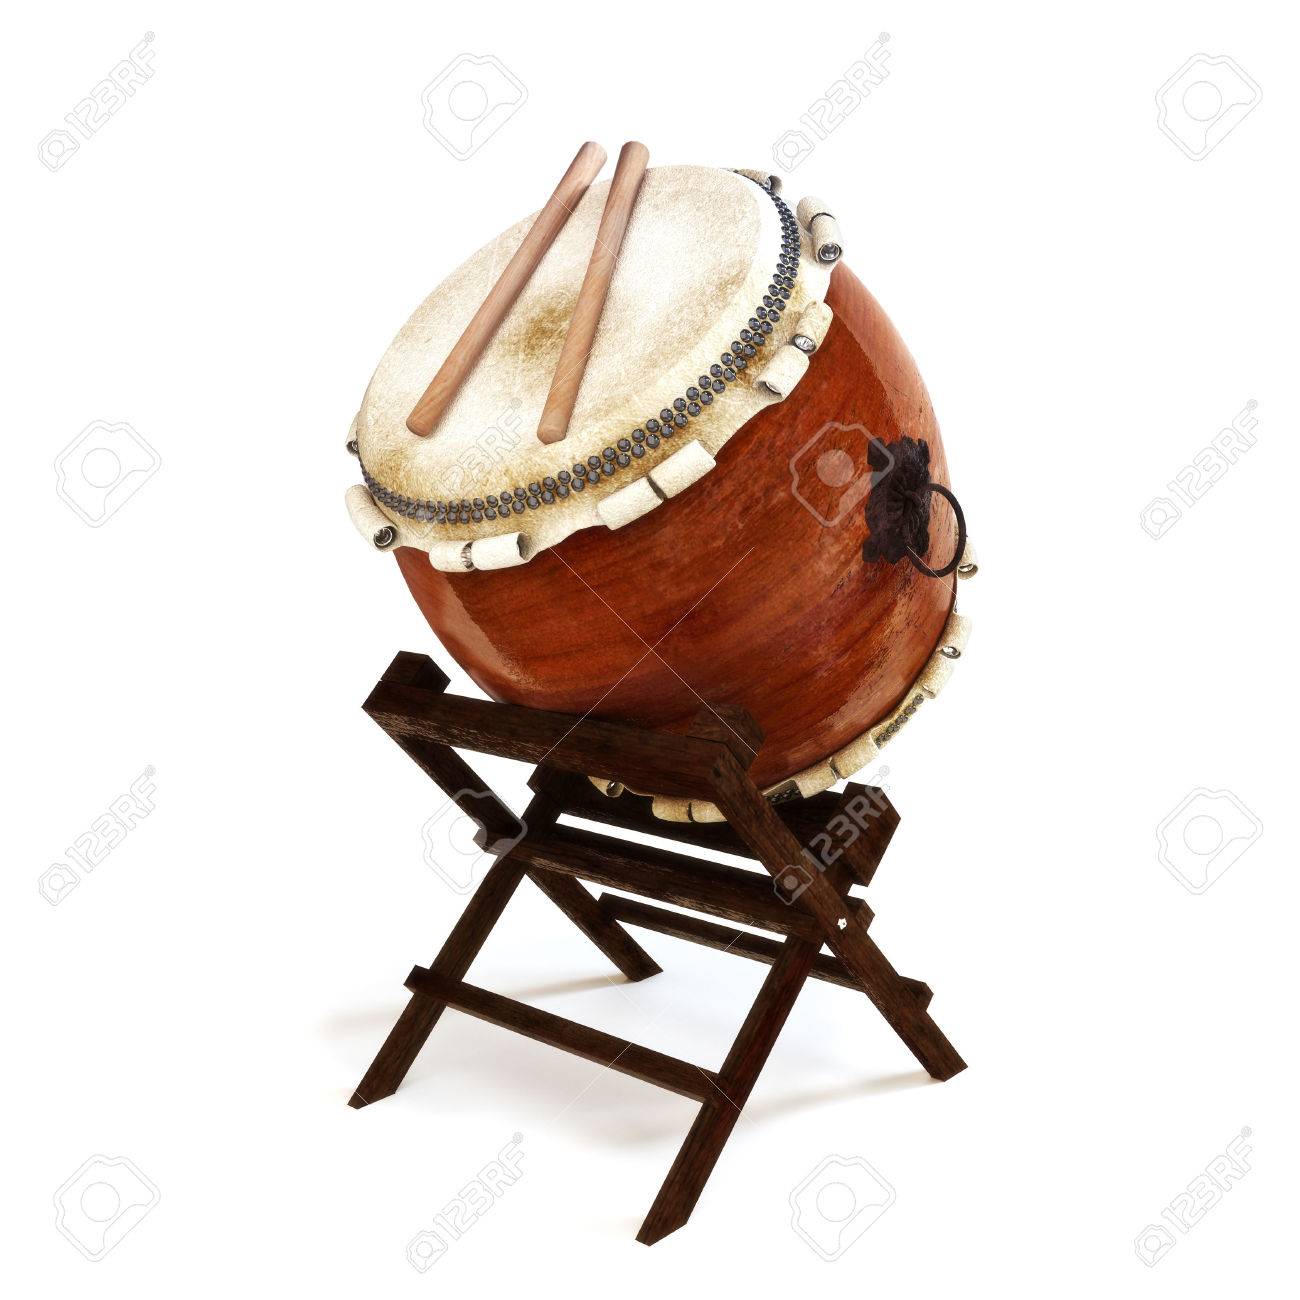 Japanese Taiko Percussion Drums Instrument On A White Isolated